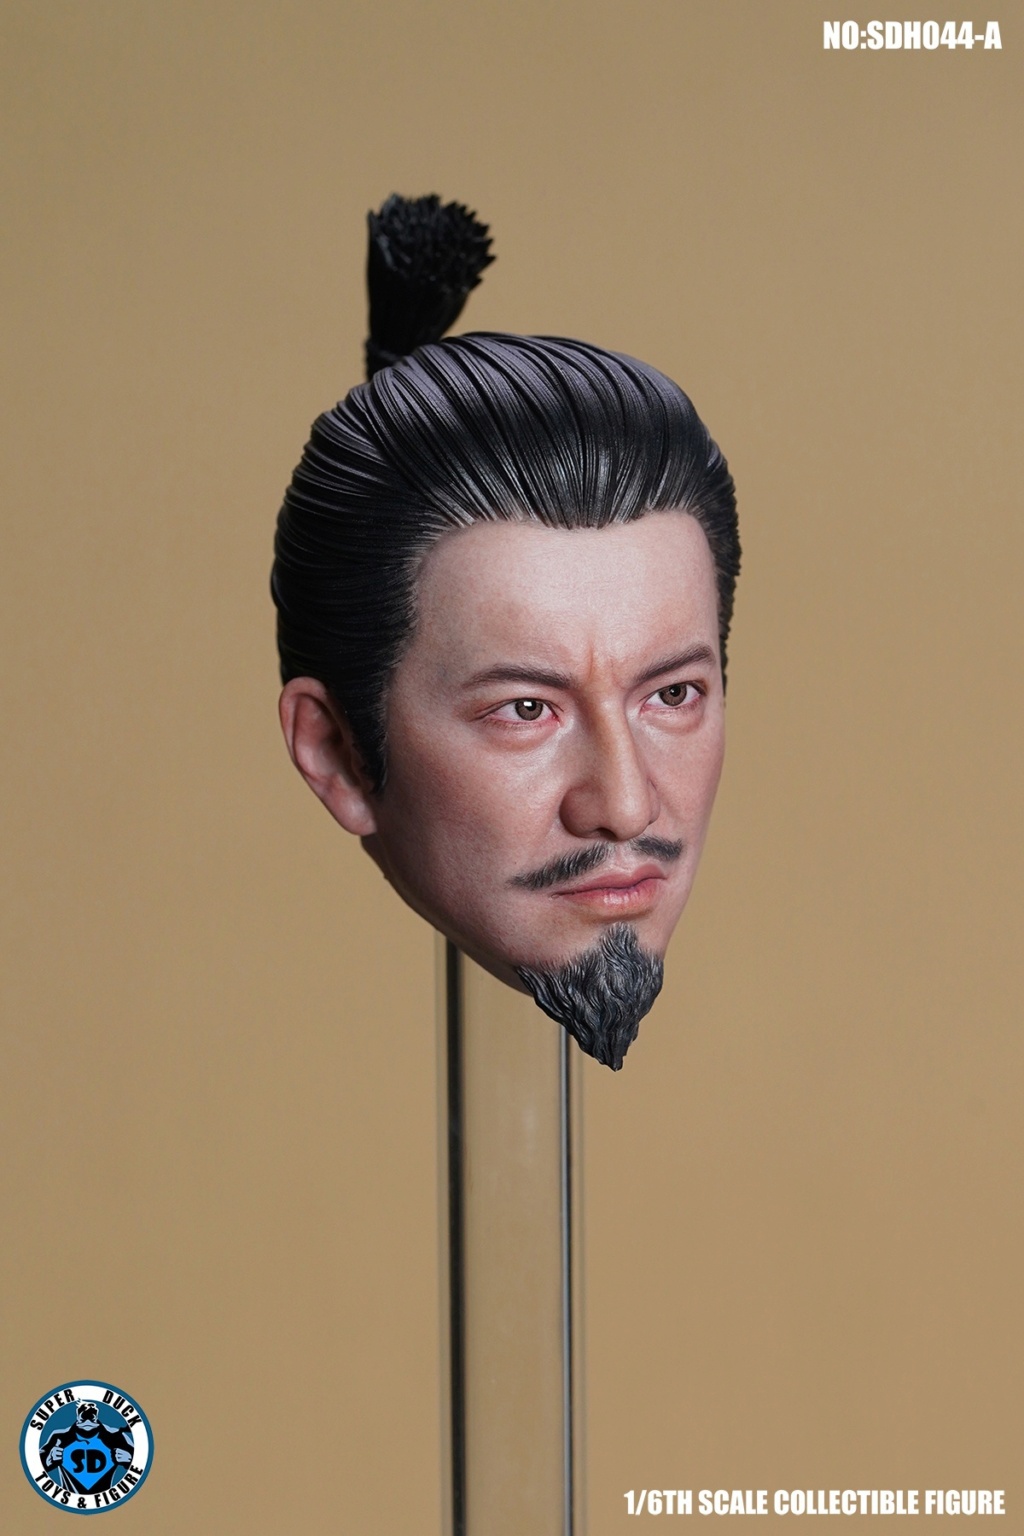 headsculpt - NEW PRODUCT: Super Duck: 1/6 Japanese samurai head carving (SDH044-A version without neck, SDH044-B version with neck) 21225012